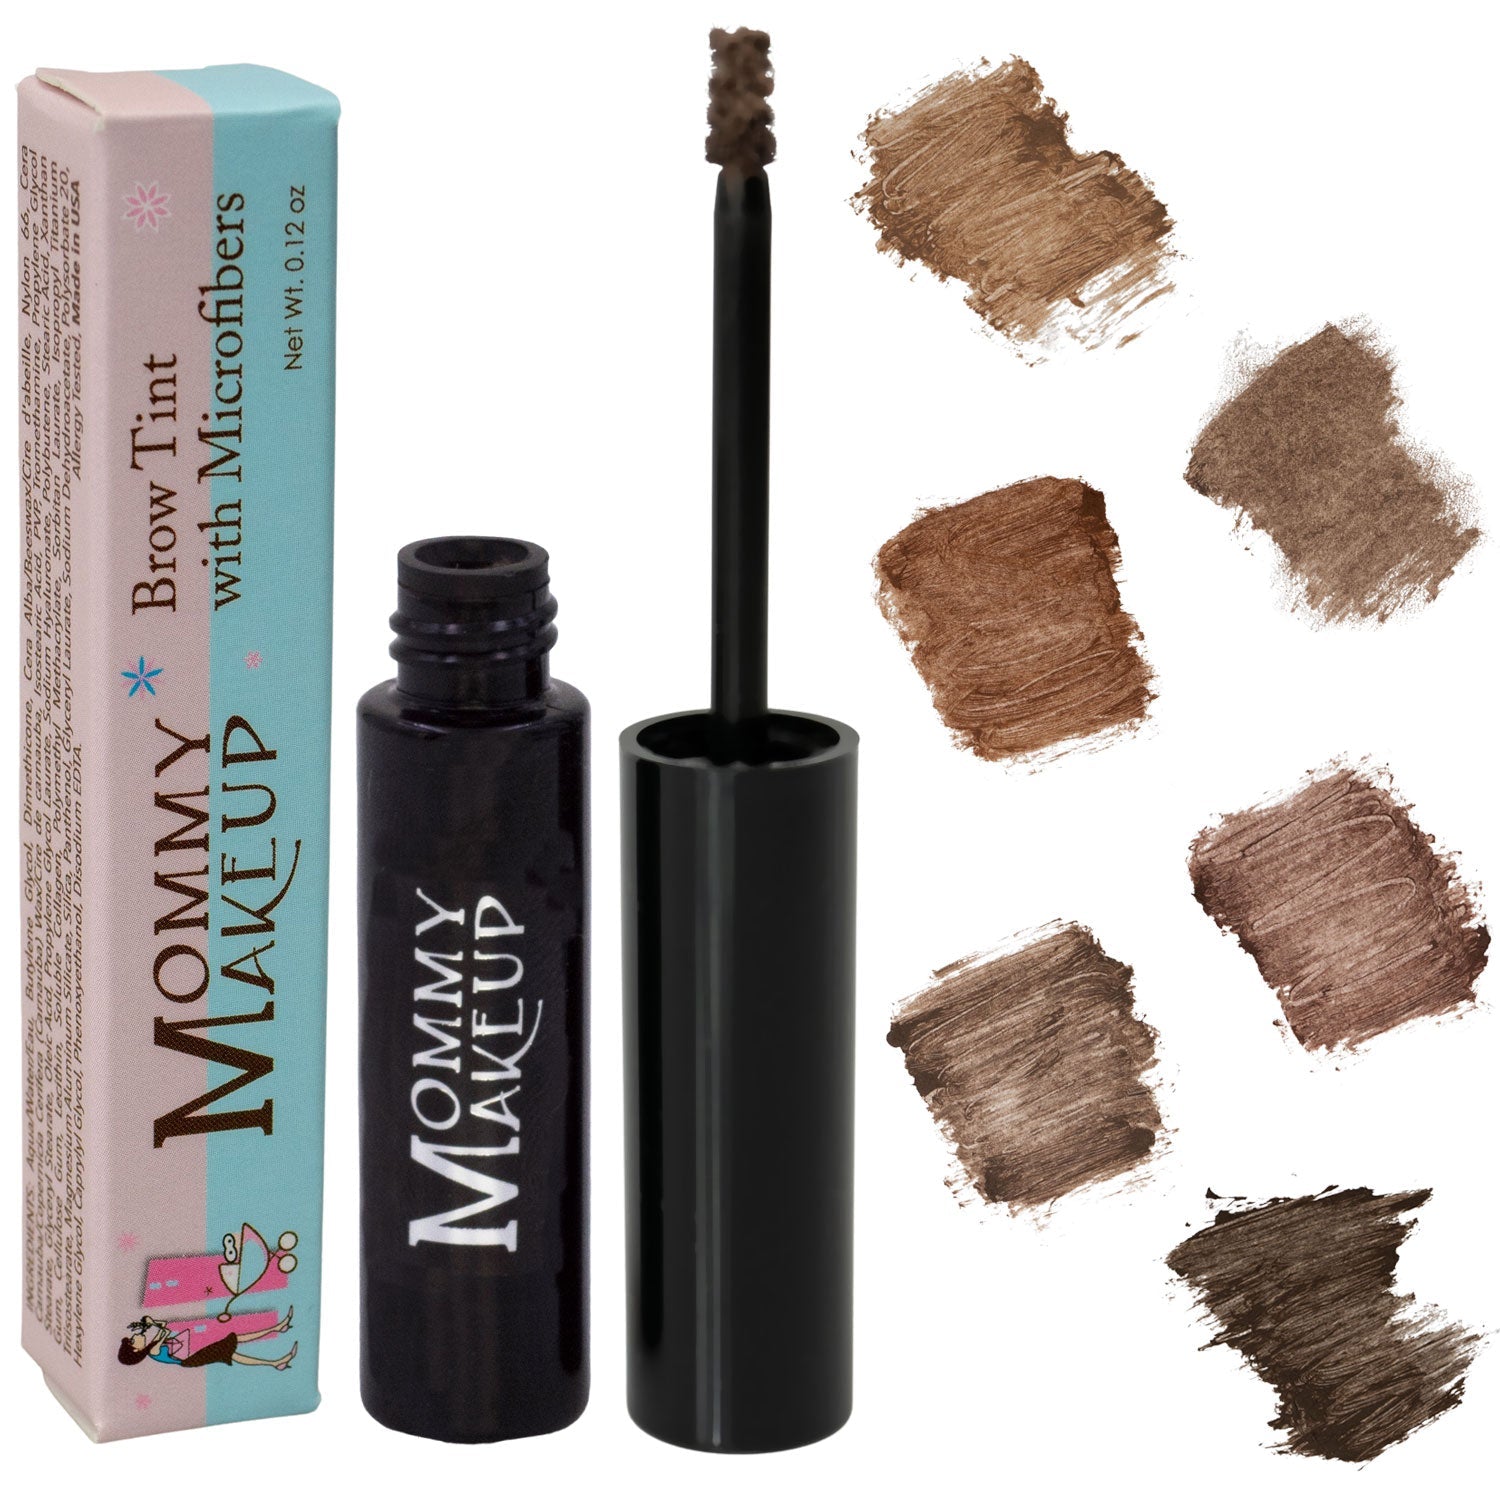 4-in-1 tinted eyebrow gel is a easy way to groom, shape, build fullness, and add a tint of color to your brows! Clump-free, paraben-free, talc free, allergy tested, PETA certified cruelty free Brow Tint with Microfibers